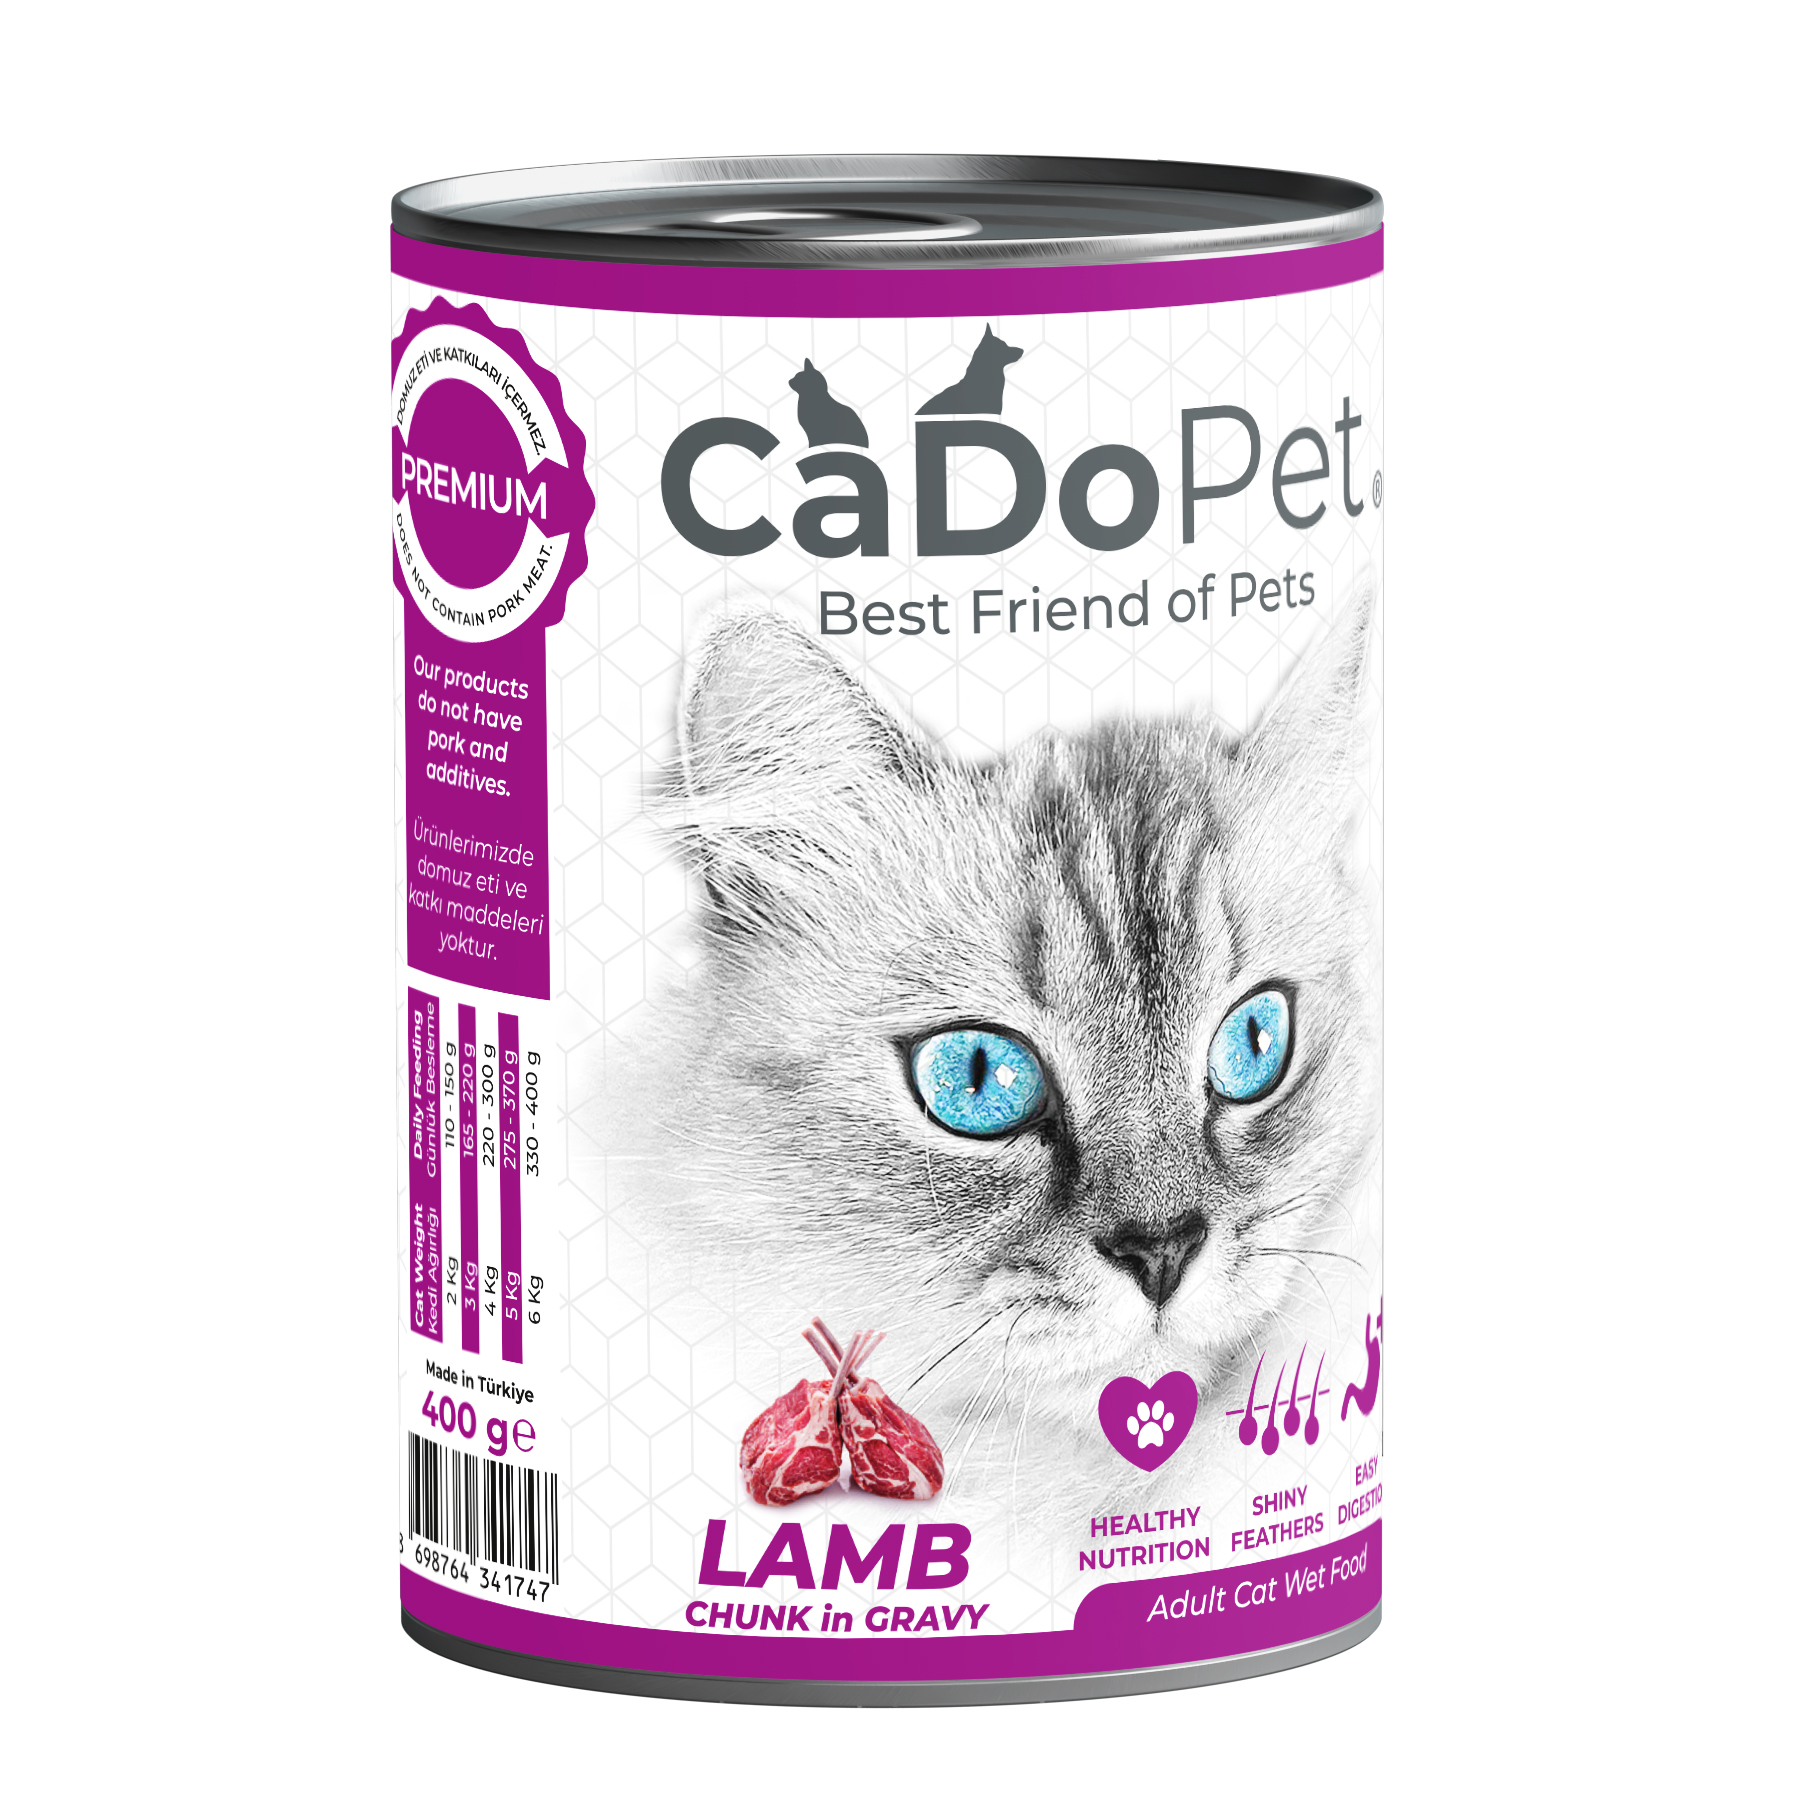 .Adult Cat Wet Food 400g with Lamb Chunk.